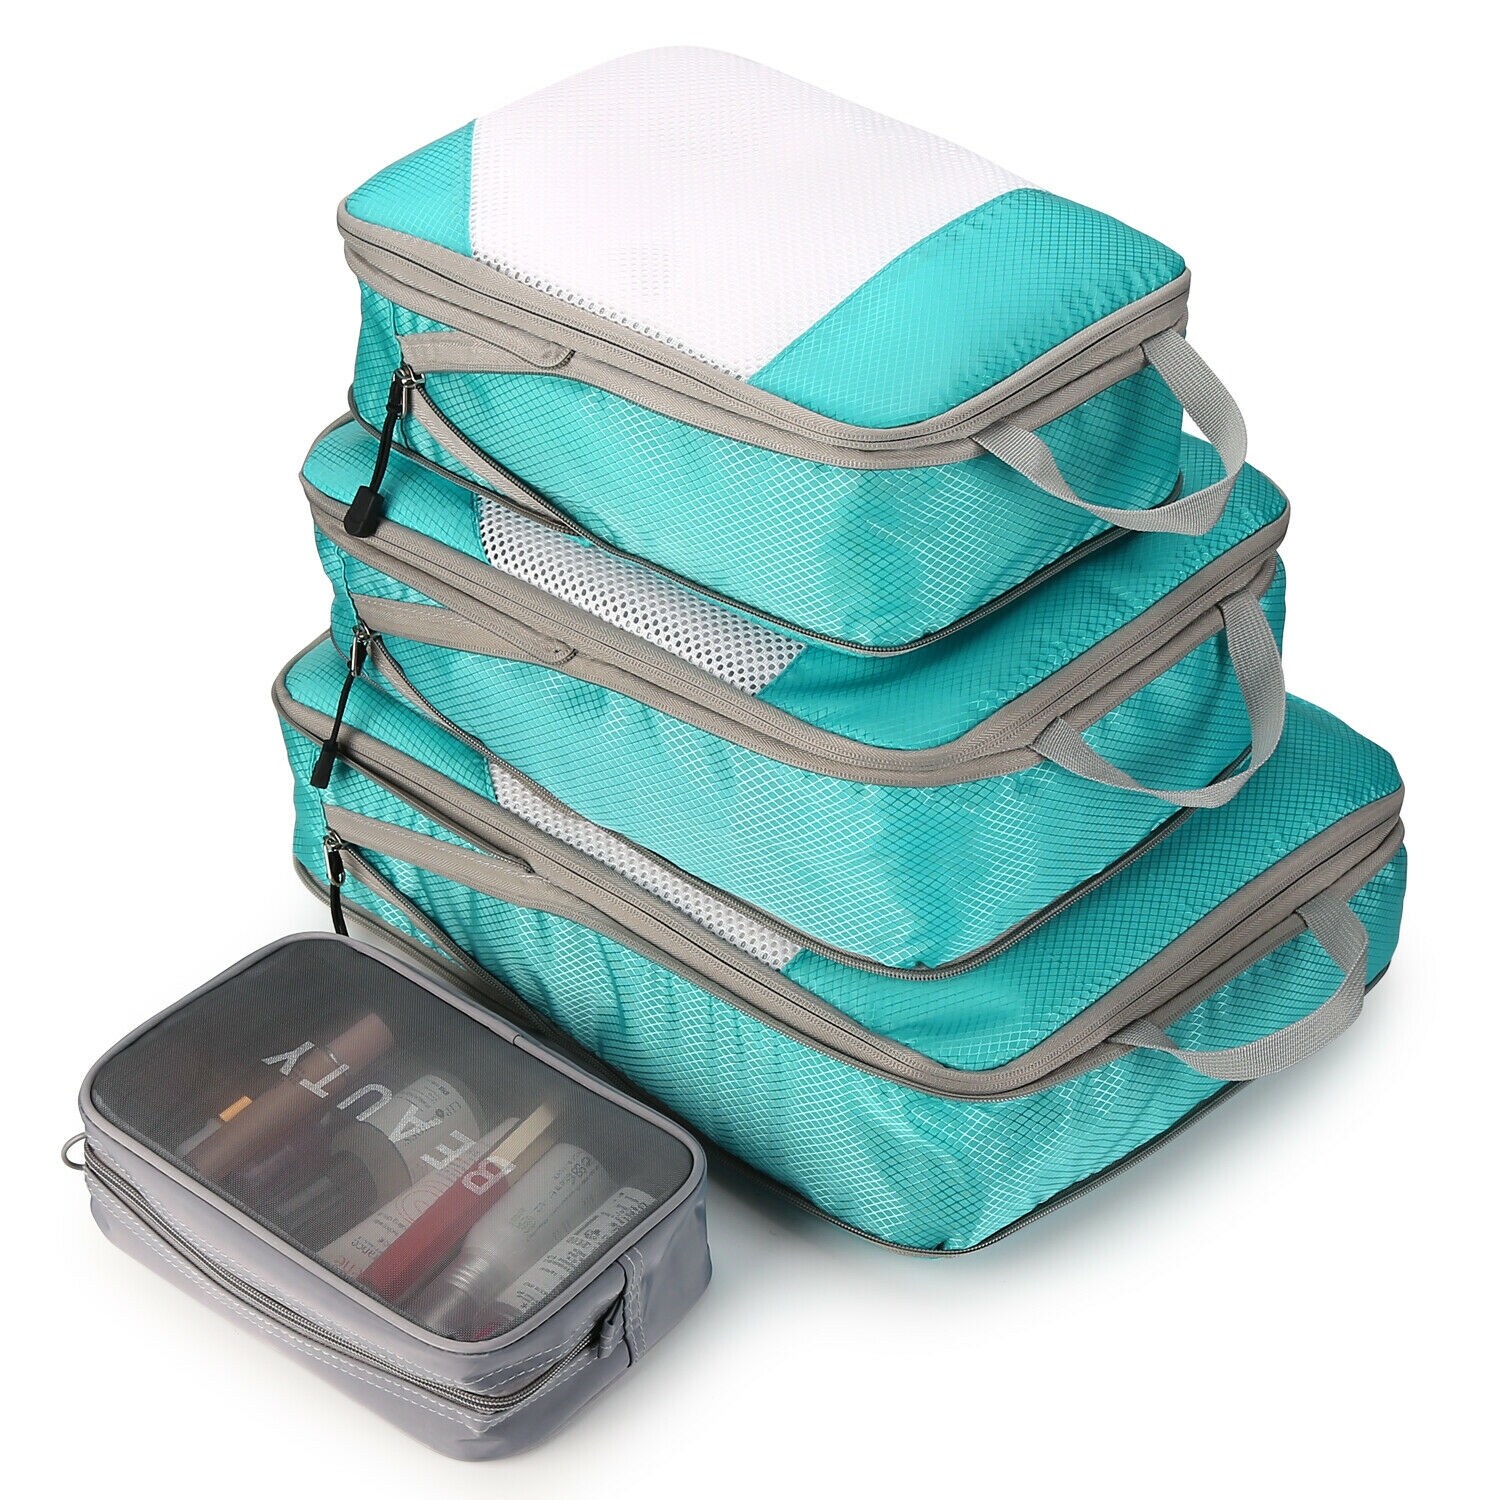 4PCS Travel Suitcase Storage Bag Set Luggage Organizer Bags Clothes Packing  Cube - S - Bed Bath & Beyond - 32603921